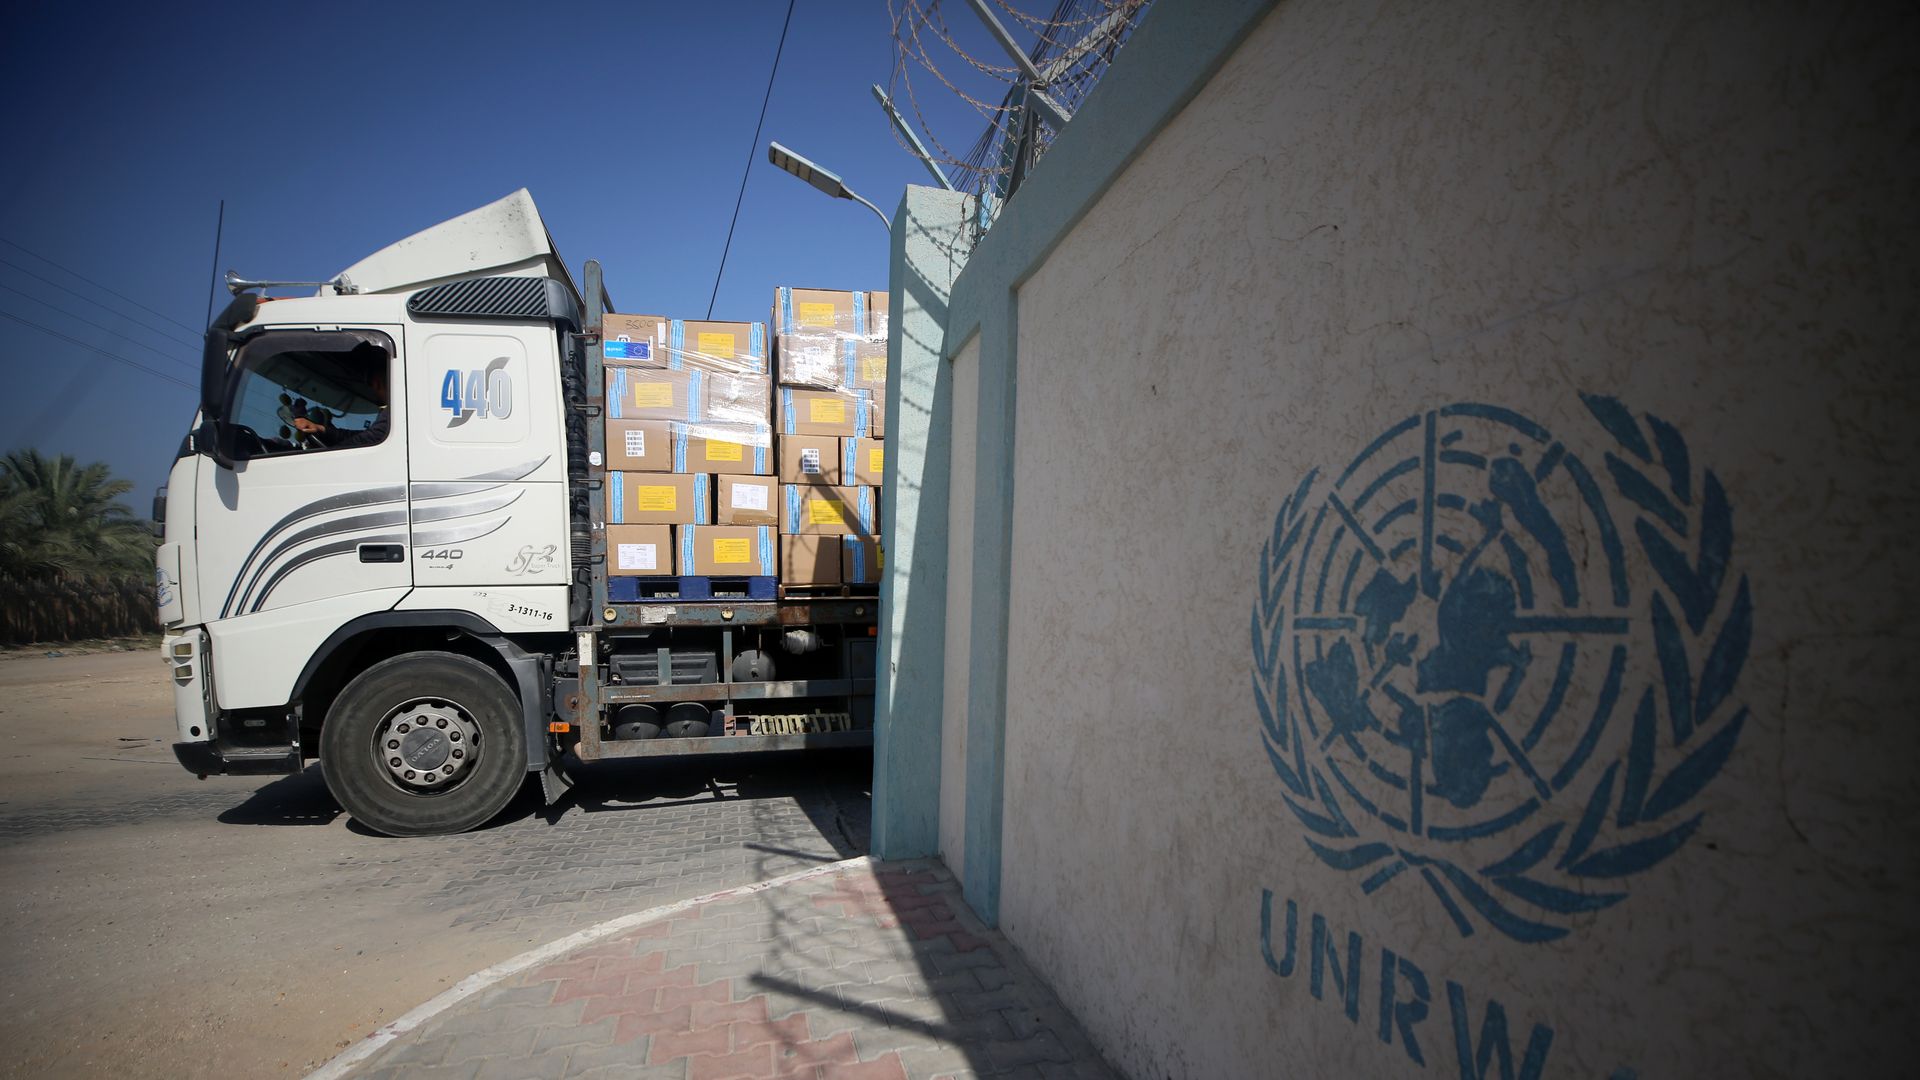 Workers of the United Nations Relief and Works Agency for Palestine Refugees (UNRWA) pack the medical aid and prepare it for distribution to hospitals at a warehouse in Deir Al-Balah, Gaza